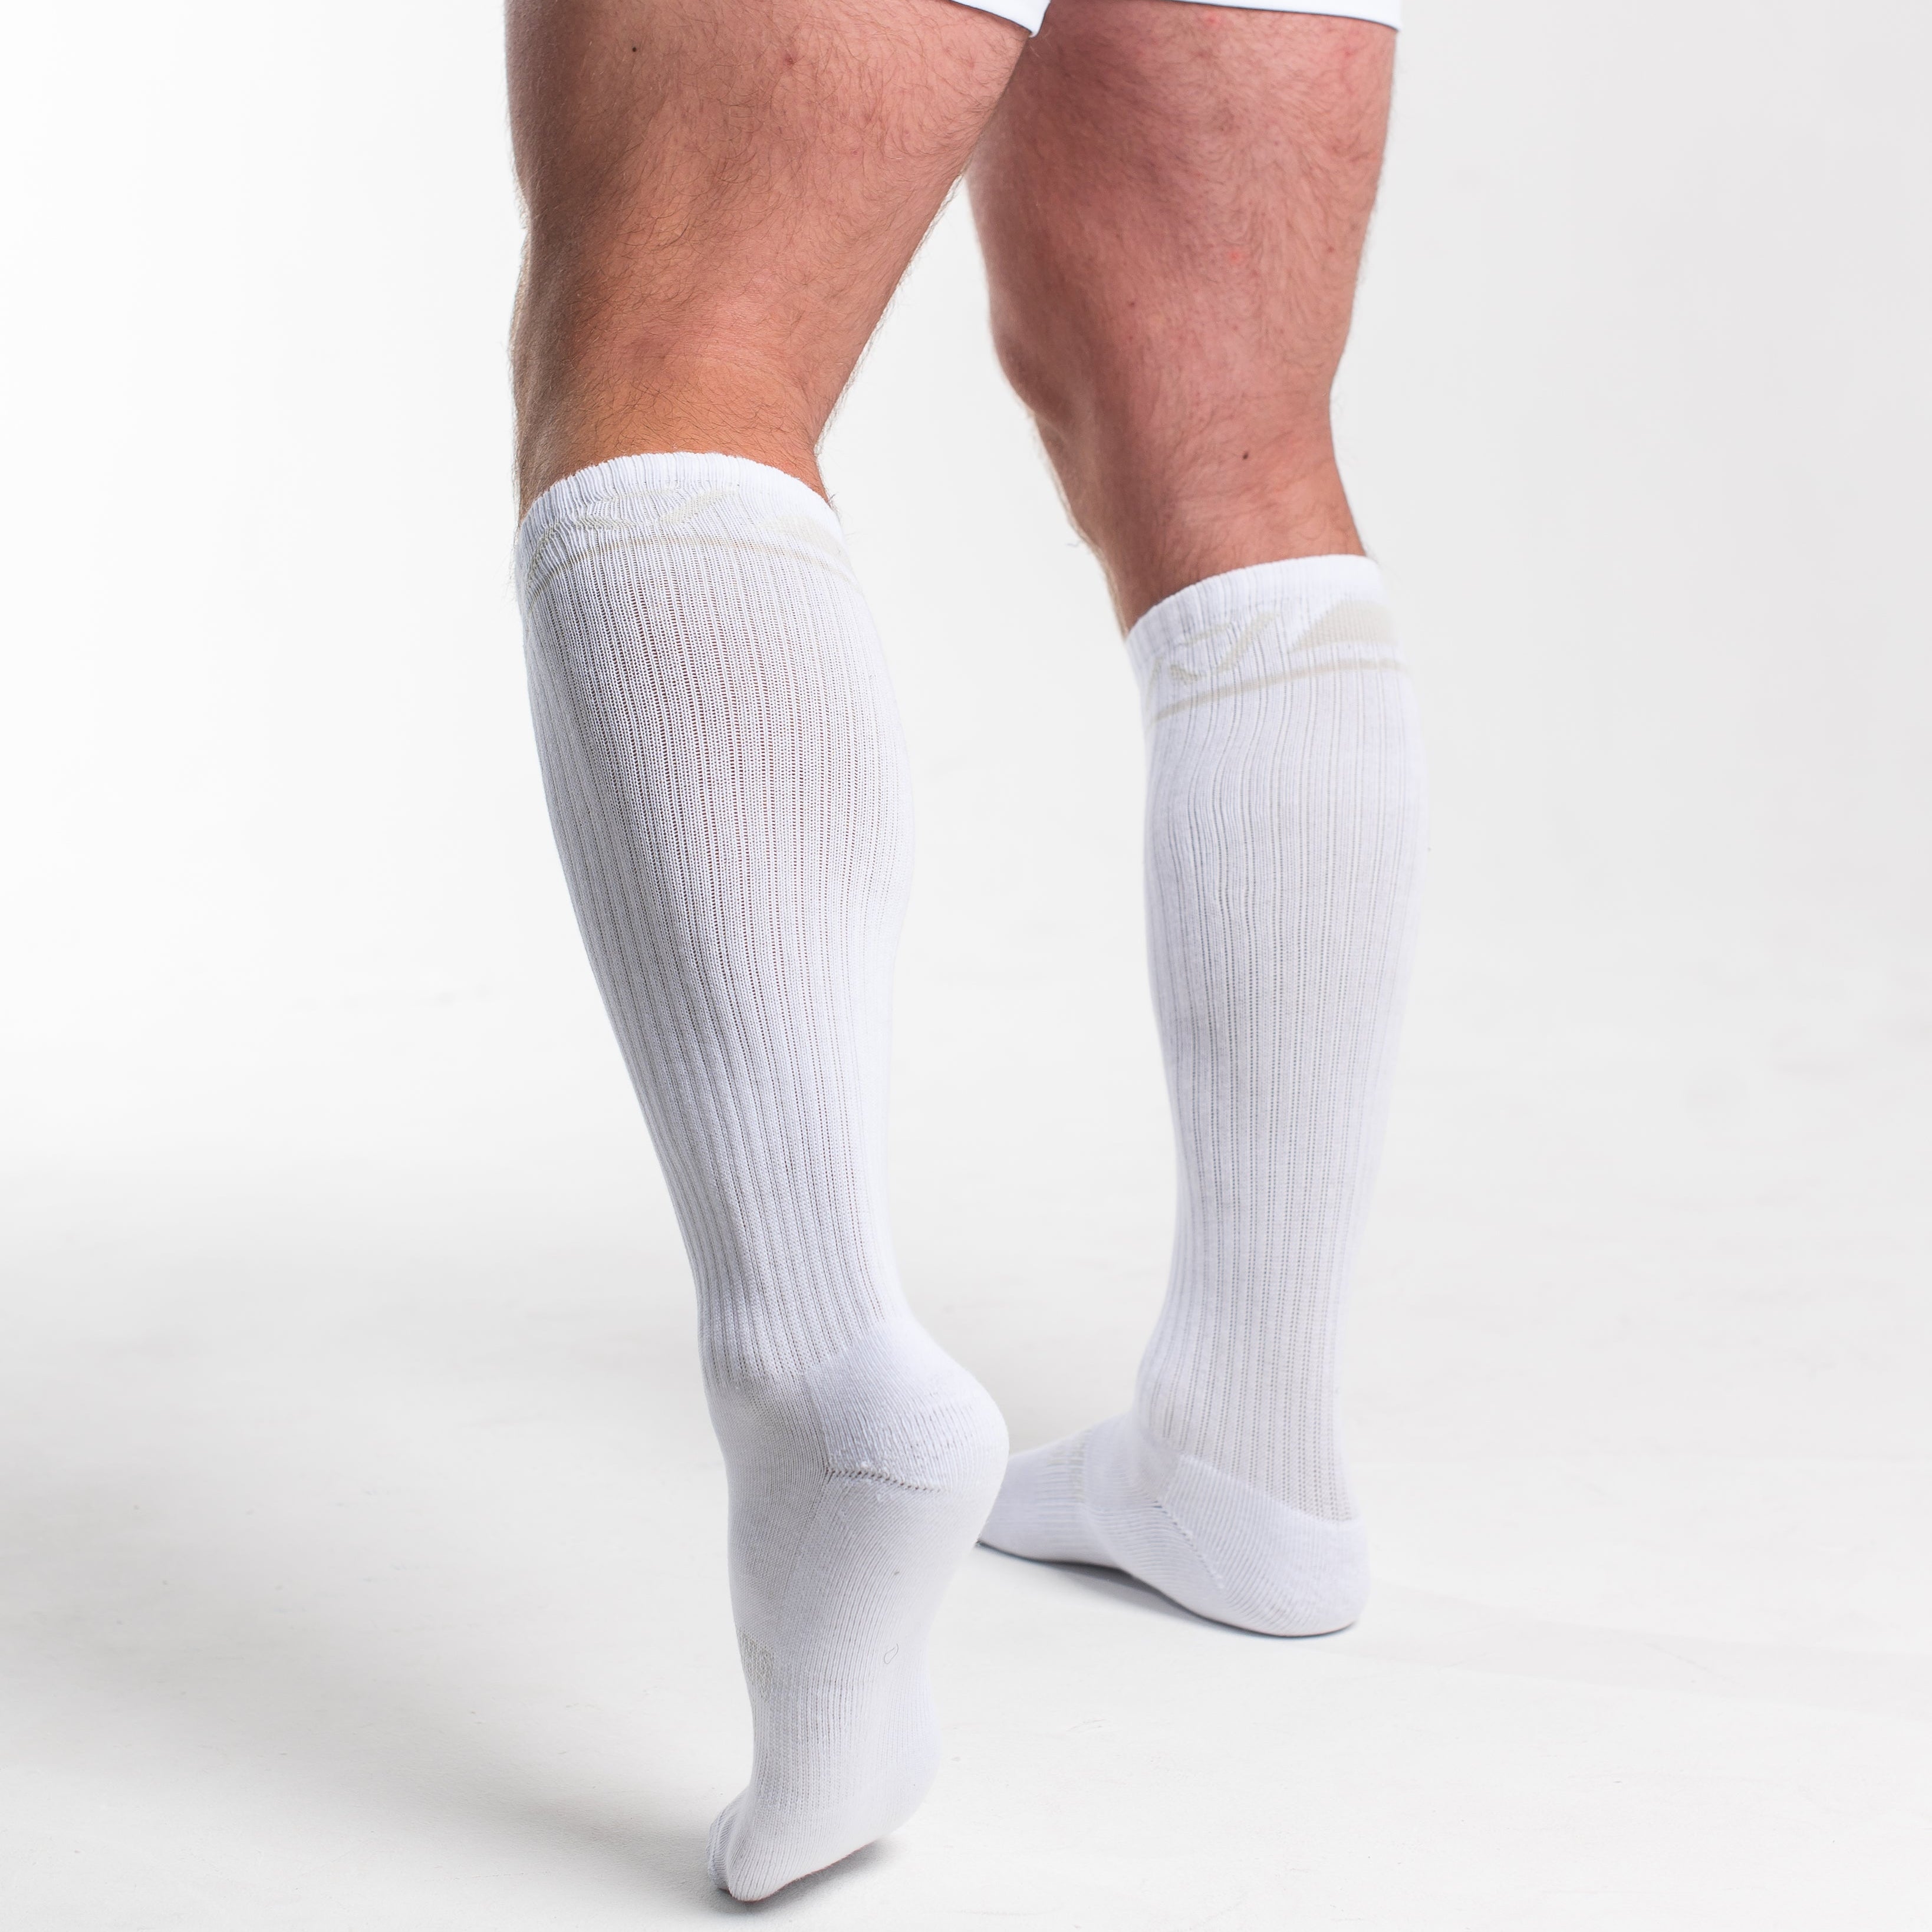 A7 Polar Deadlift socks are designed specifically for pulls and keep your shins protected from scrapes. A7 deadlift socks are a perfect pair to wear in training or powerlifting competition. The IPF Approved Kit includes Powerlifting Singlet, A7 Meet Shirt, A7 Zebra Wrist Wraps, A7 Deadlift Socks, Hourglass Knee Sleeves (Stiff Knee Sleeves and Rigor Mortis Knee Sleeves). Genouillères powerlifting shipping to France, Spain, Ireland, Germany, Italy, Sweden and EU.